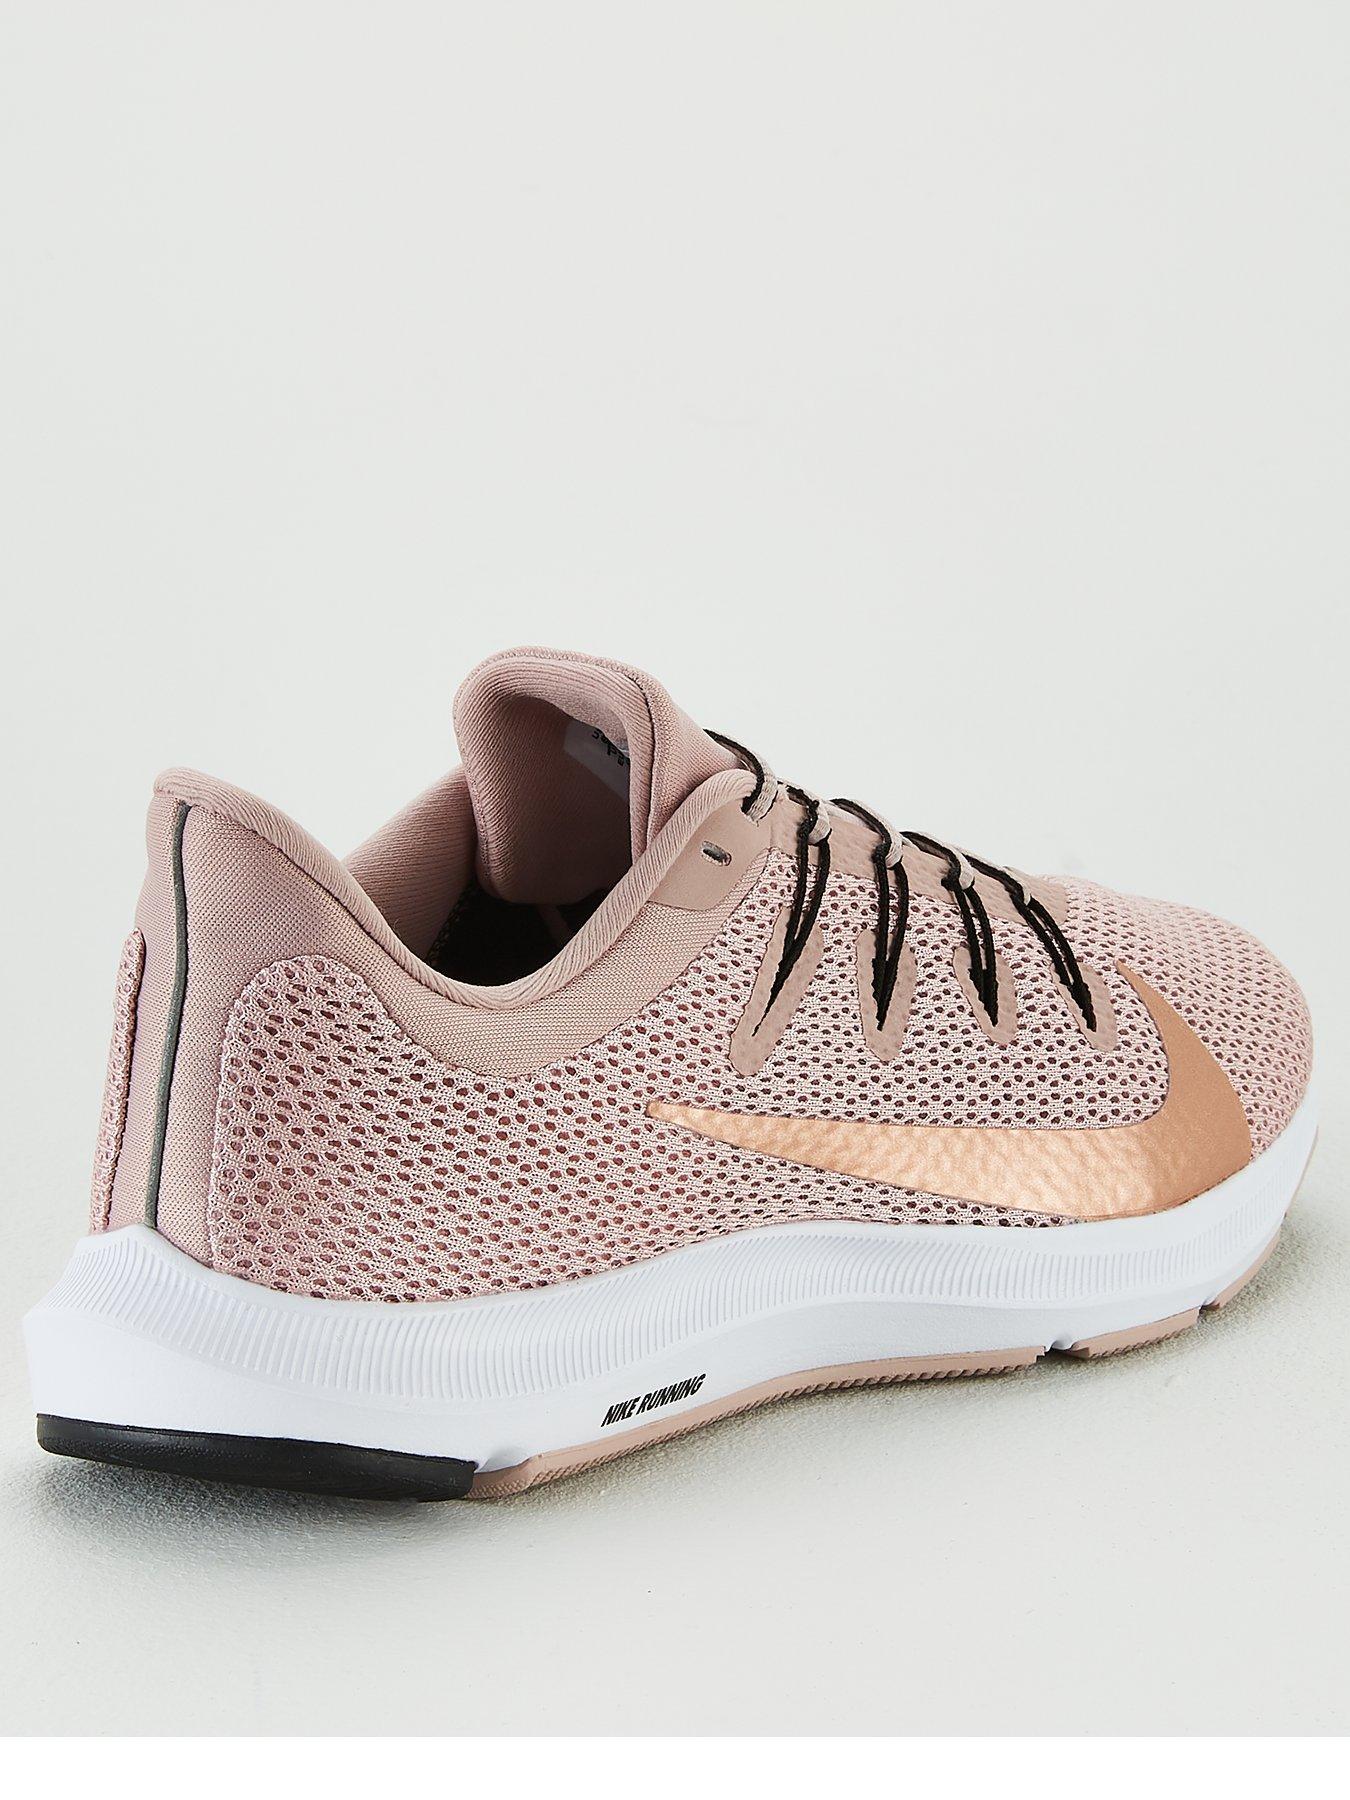 nike quest 2 rose gold